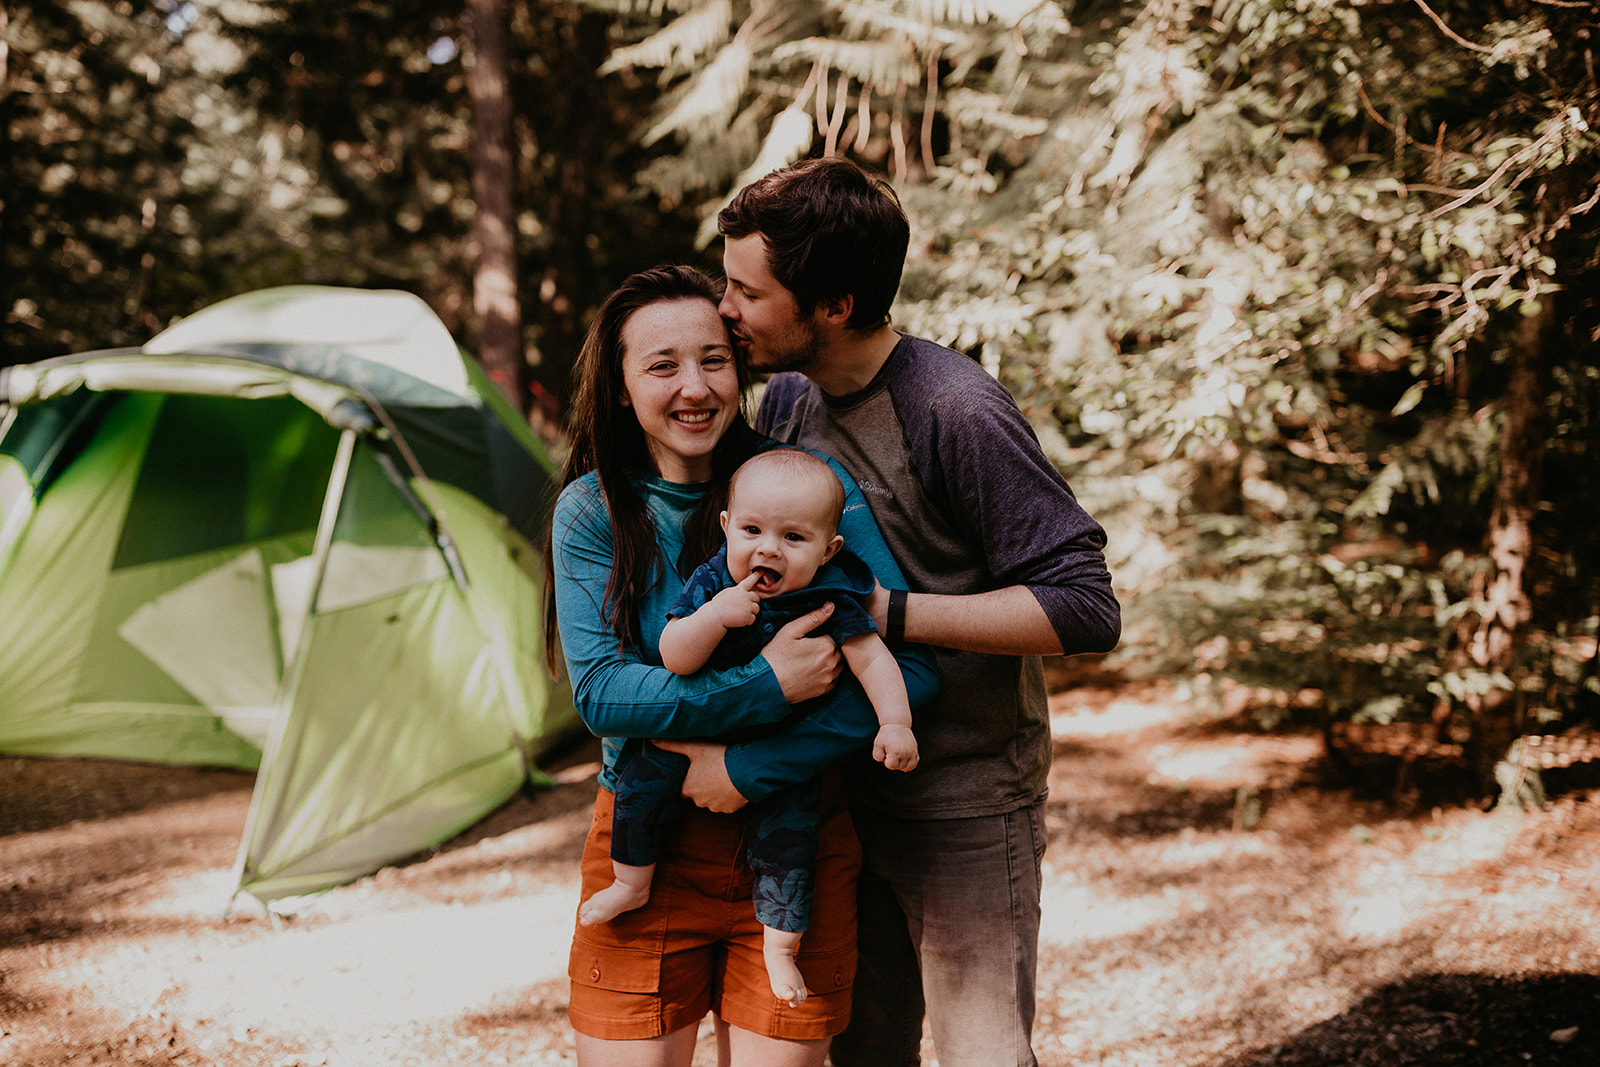 kachess-lake-camping-family-portraits-megan-gallagher-photography_(85_of_335).jpg